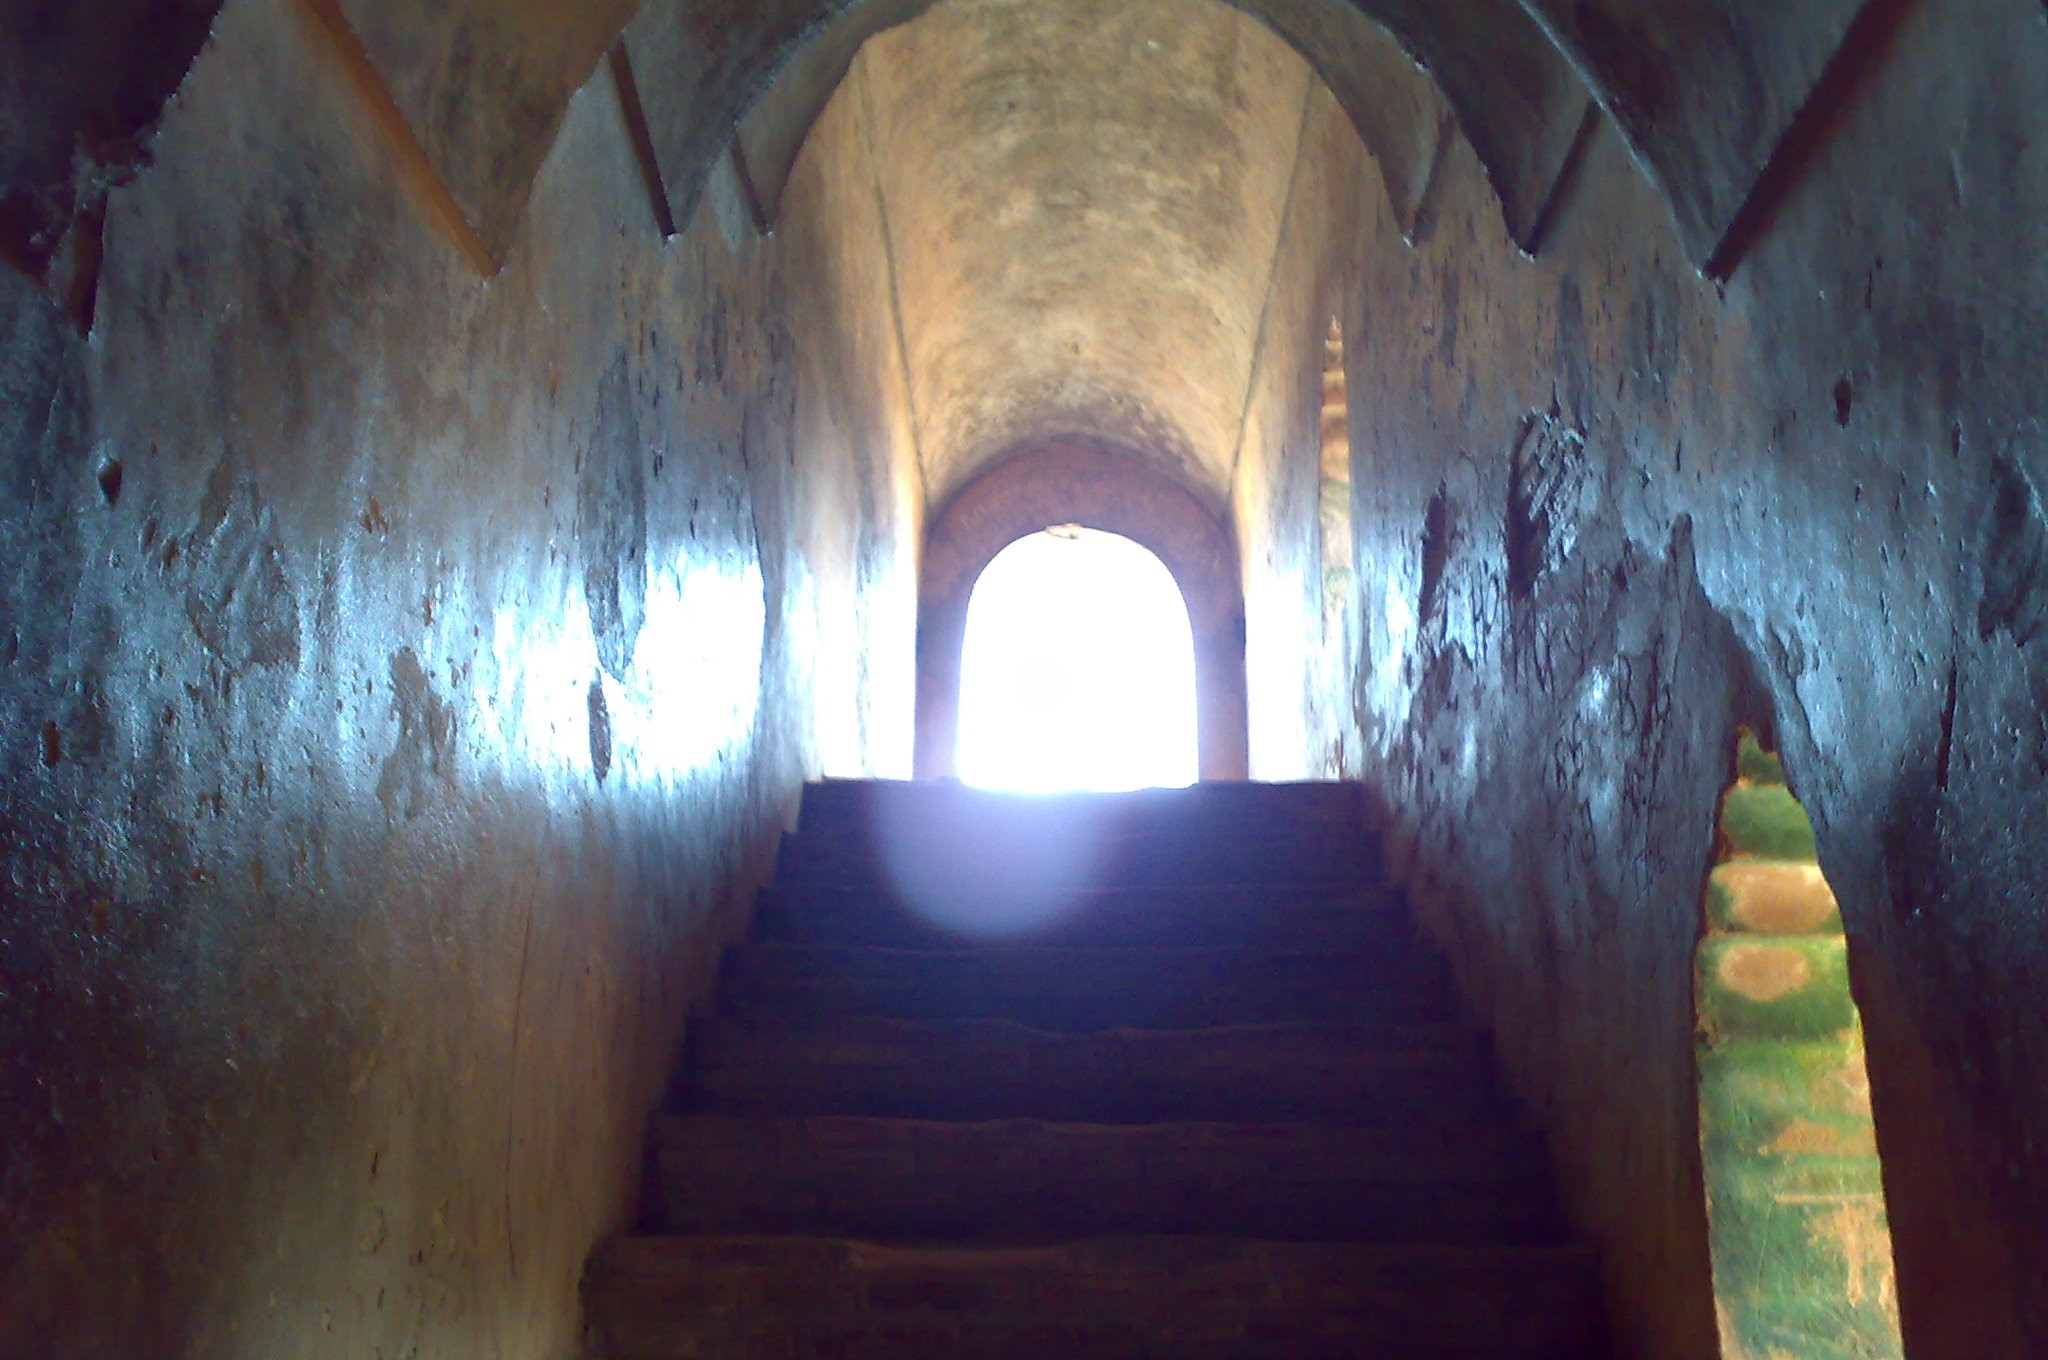 A staircase in the Talatal Ghar. Image Source: Wikimedia Commons